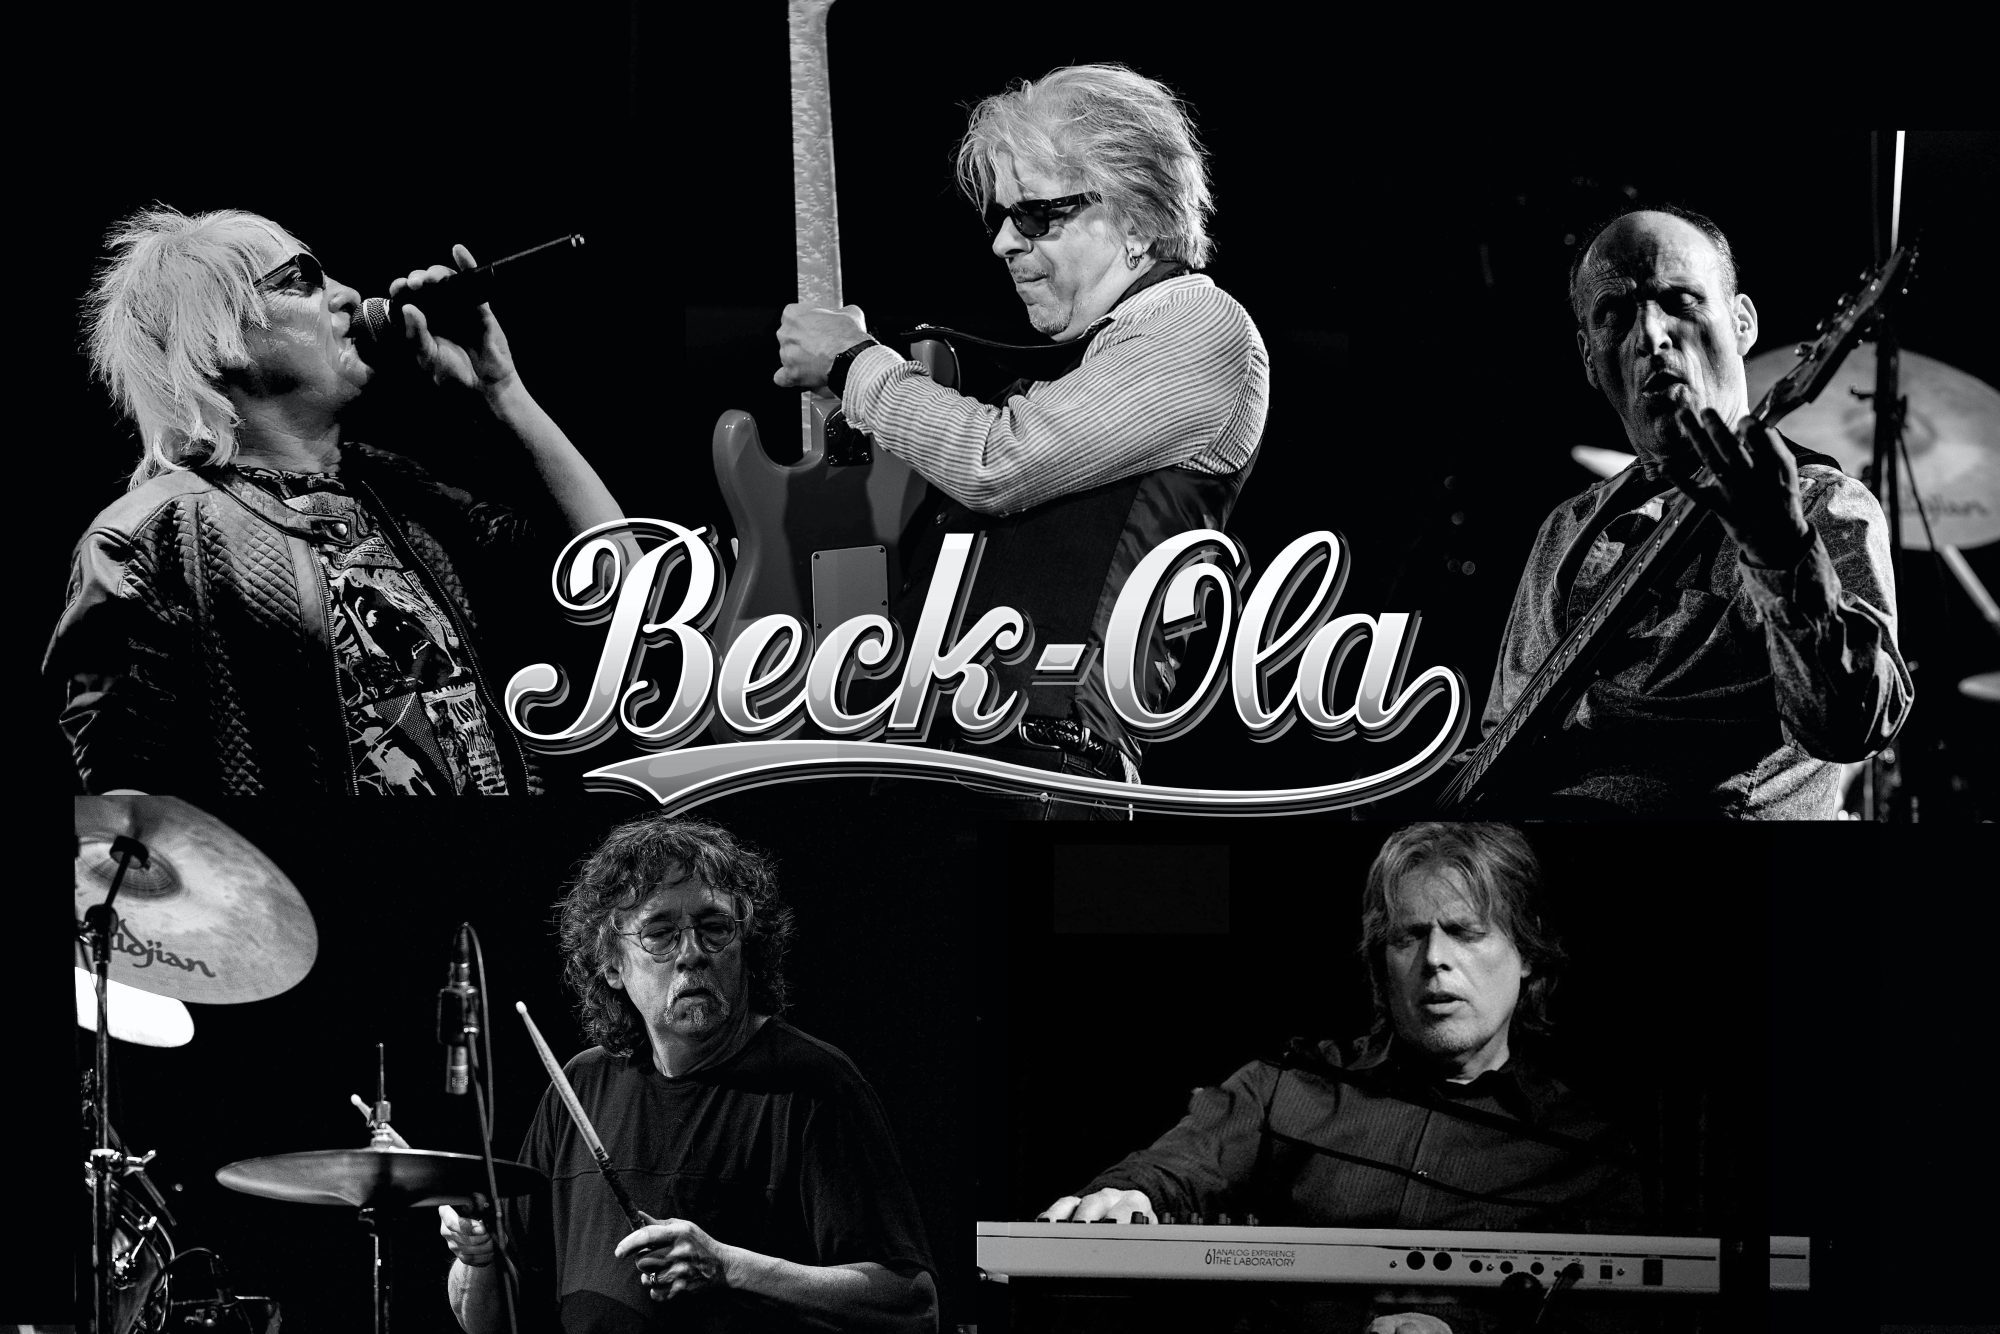 Check out this classic black and white image of the famous band, Beck Ola. Perfect for music lovers through and through.